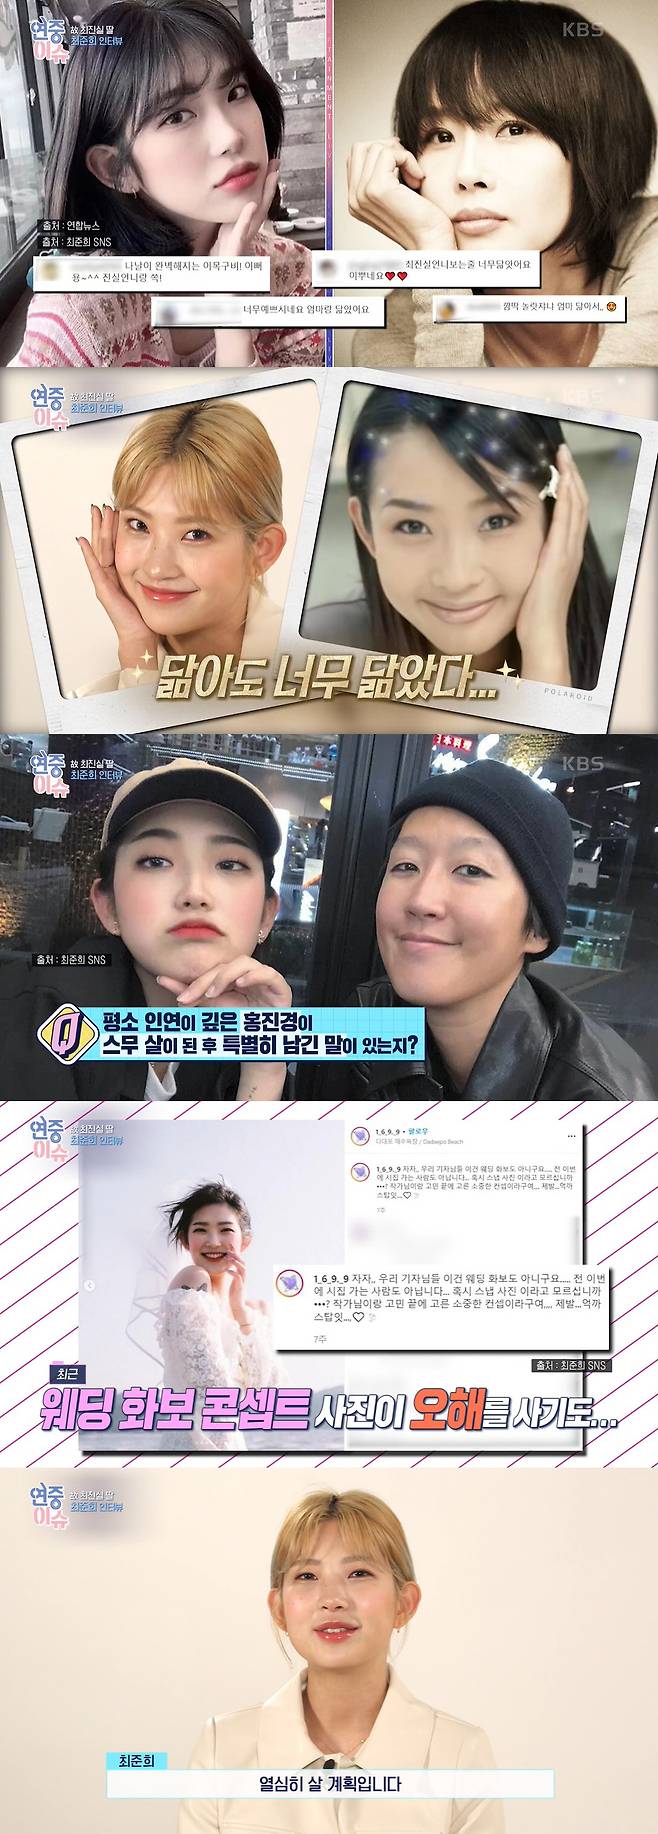 Actor late Choi Jin-sils daughter Choi Joon-Hee has revealed that lupus disease has not been cured.Choi Joon-Hees interview was broadcast on KBS2 Year-round live broadcast on the 11th.Choi Joon-Hee, who was born in 2003 and turned 20 this year, laughed brightly, saying, It is good that you can buy colorful drinks that you see every time you enter a convenience store as a private certificate (resident registration card).He also said that he and his brother Choi Hwan-hee (JiPlat) usually think of the broadcaster Jin-kyeong Hong as a mother, and recently Jin-kyeong Hong said, I am 20 years old and I want to cope more maturely.Choi Joon-Hee added: Precisely call me and say, Always my aunt is praying for Junhee.Choi Joon-Hee has gained weight to 96kg due to a battle with lupus disease, but lost 44kg and collected a big topic.I went to the fitting room and put on my pants, but I did not raise my pants so that I could get red, but I did not wear it anyway.I just took off and cried a lot. I got lupus disease in my middle school, but there is no concept of cure, and I am still taking medicine, and I have increased my weight because of it.I ate a lot because of the side effects of the medicine, he added.Choi Joon-Hee said, I want to follow my mothers picture. Choi Jin-sils photo was released. I take pictures of this style a little often.I have to shoot it, so I have to raise my eyes.  I do not have a youthful mother. I have to sweep my temples. Choi Joon-Hee said, I am not sure yet that you think you will be following your mother.I want to try the cafe, and I am interested in dog beauty and makeup. I still want to do so, so I feel sorry to have to choose one job. Choi Joon-Hee also said, I did not live a long life, but I think I have been through a lot of work in the movie for 20 years, so I am preparing a prose book containing what I learned and what I felt at my point of view.Sometimes it is said that every move is a burden. Sometimes ordinary friends are envious. (SNS) I look exaggerated if I raise one.It was a little bit tough in my school days, she said.Finally, Choi Joon-Hee said, It is not an exaggeration to say that my mother gave birth and the public raised it.I look forward to my mothers share and look at her with a lot of love, and my brother and I plan to live hard enough to think that my mother and uncle are cool when they see them in the sky. 